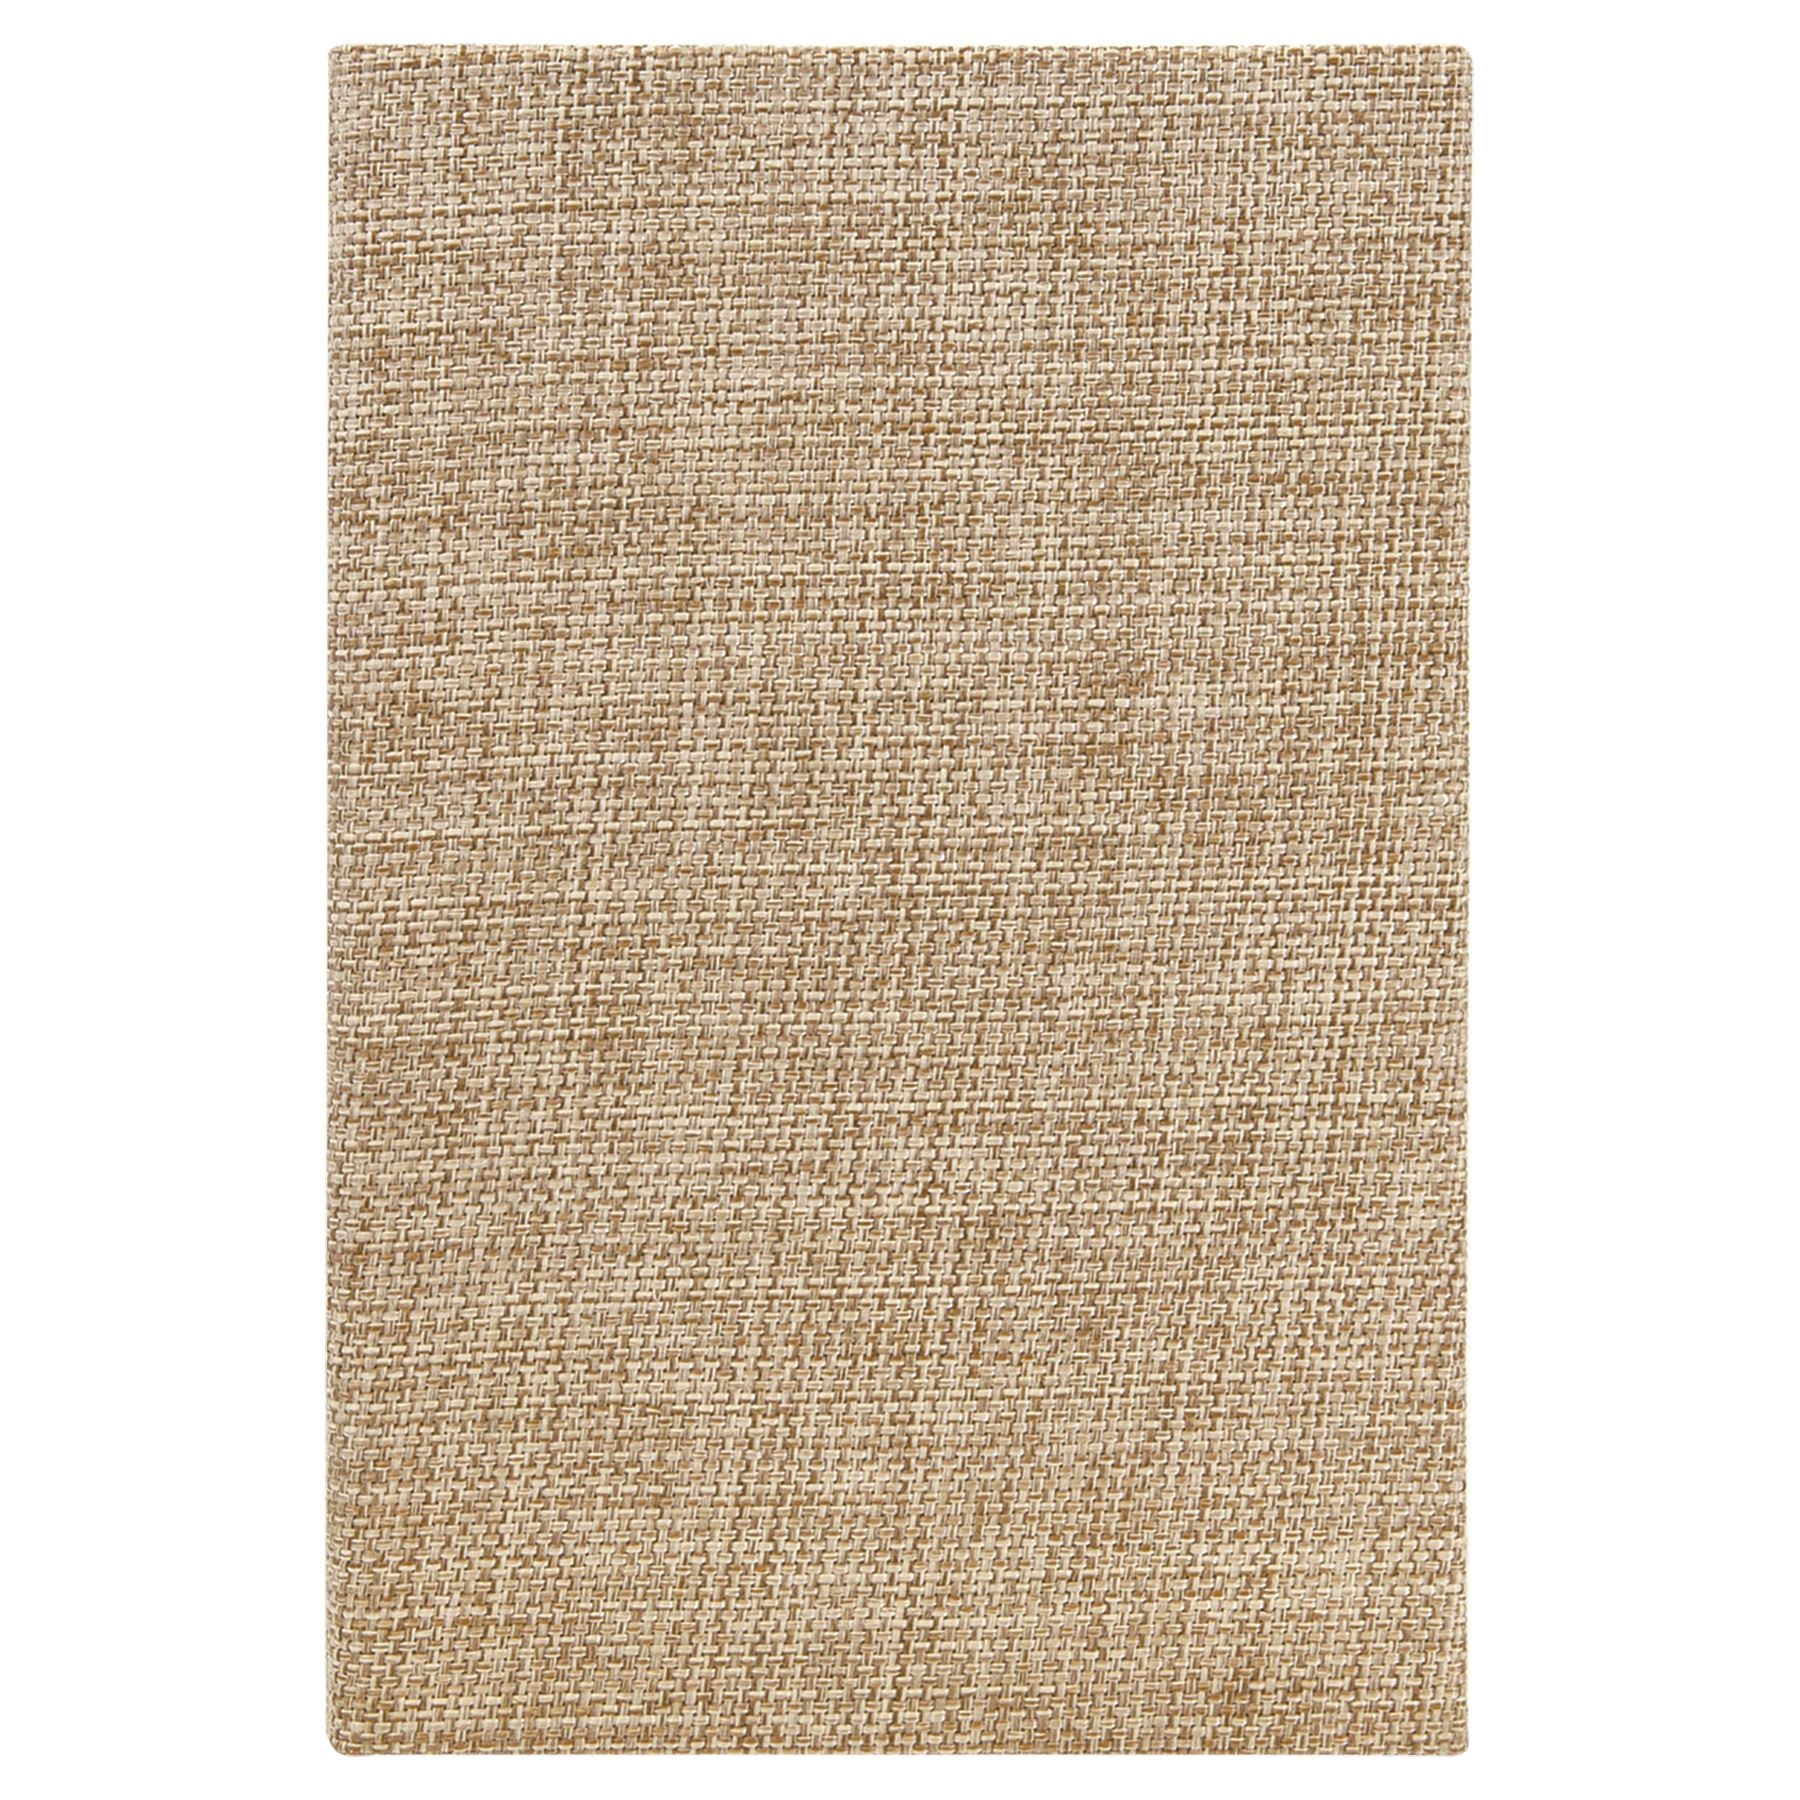 Journal, Sublimatable Burlap, 5 1/4" x 8 1/4" Journal Craftworks NW 